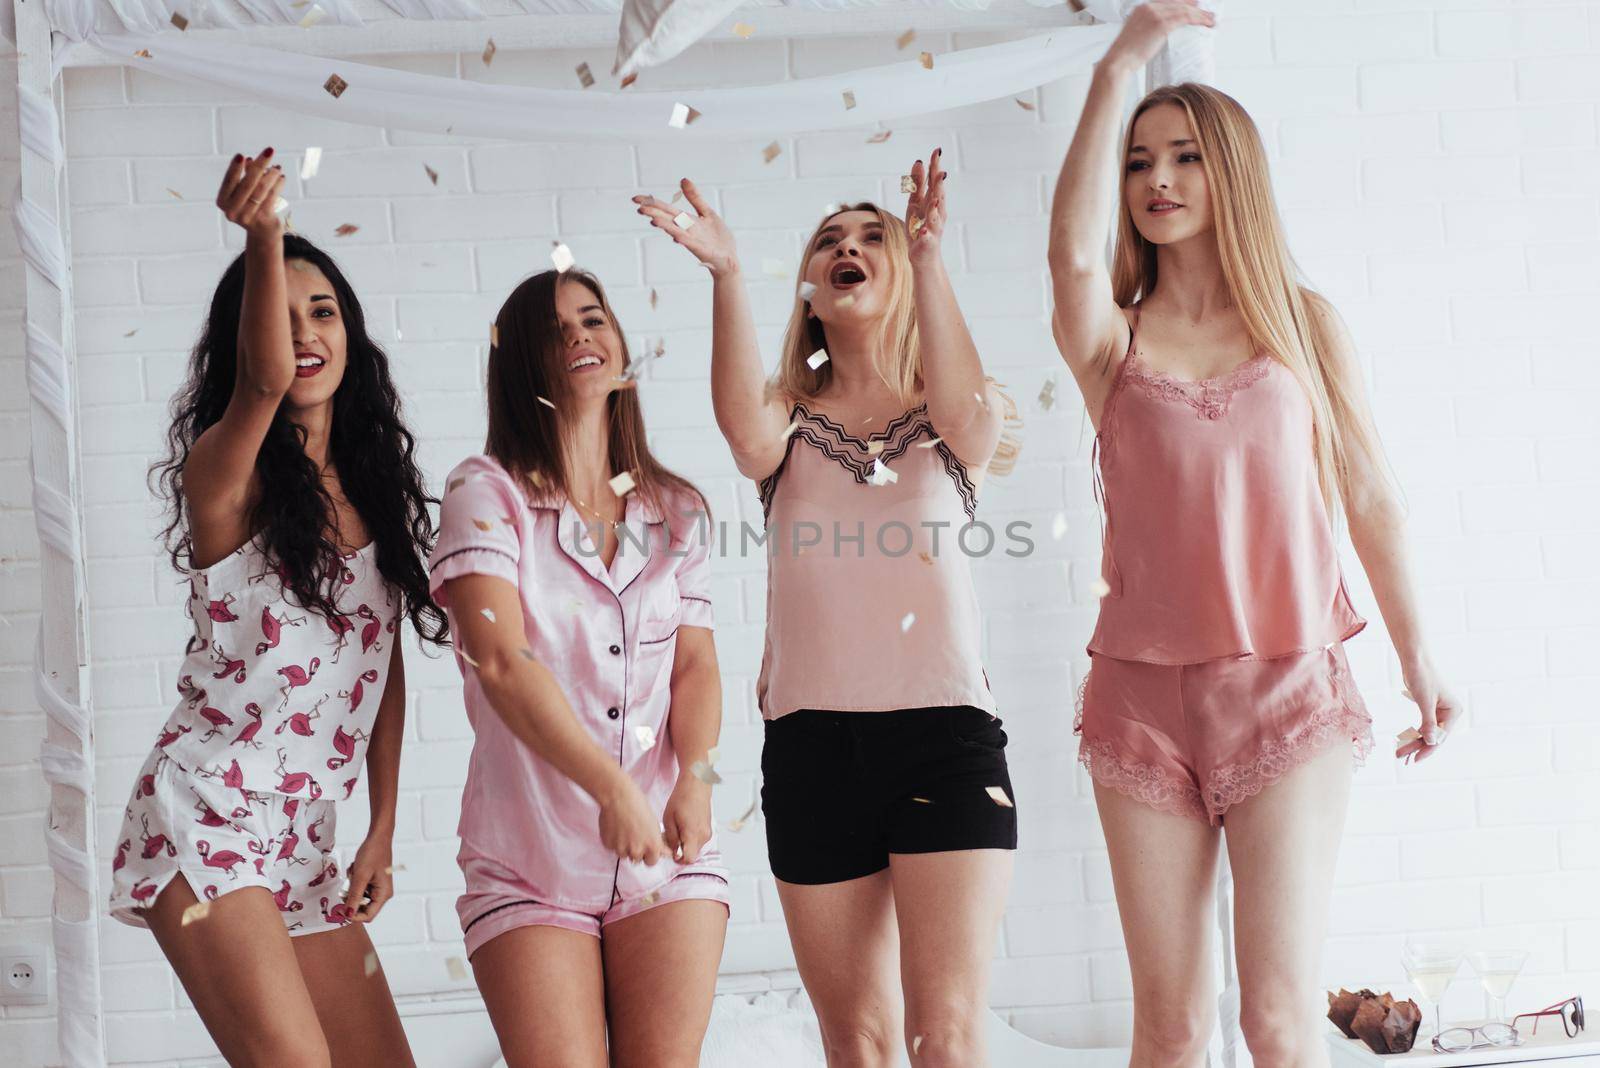 Look at these flying things. Confetti in the air. Young girls have fun on the white bed in nice room.